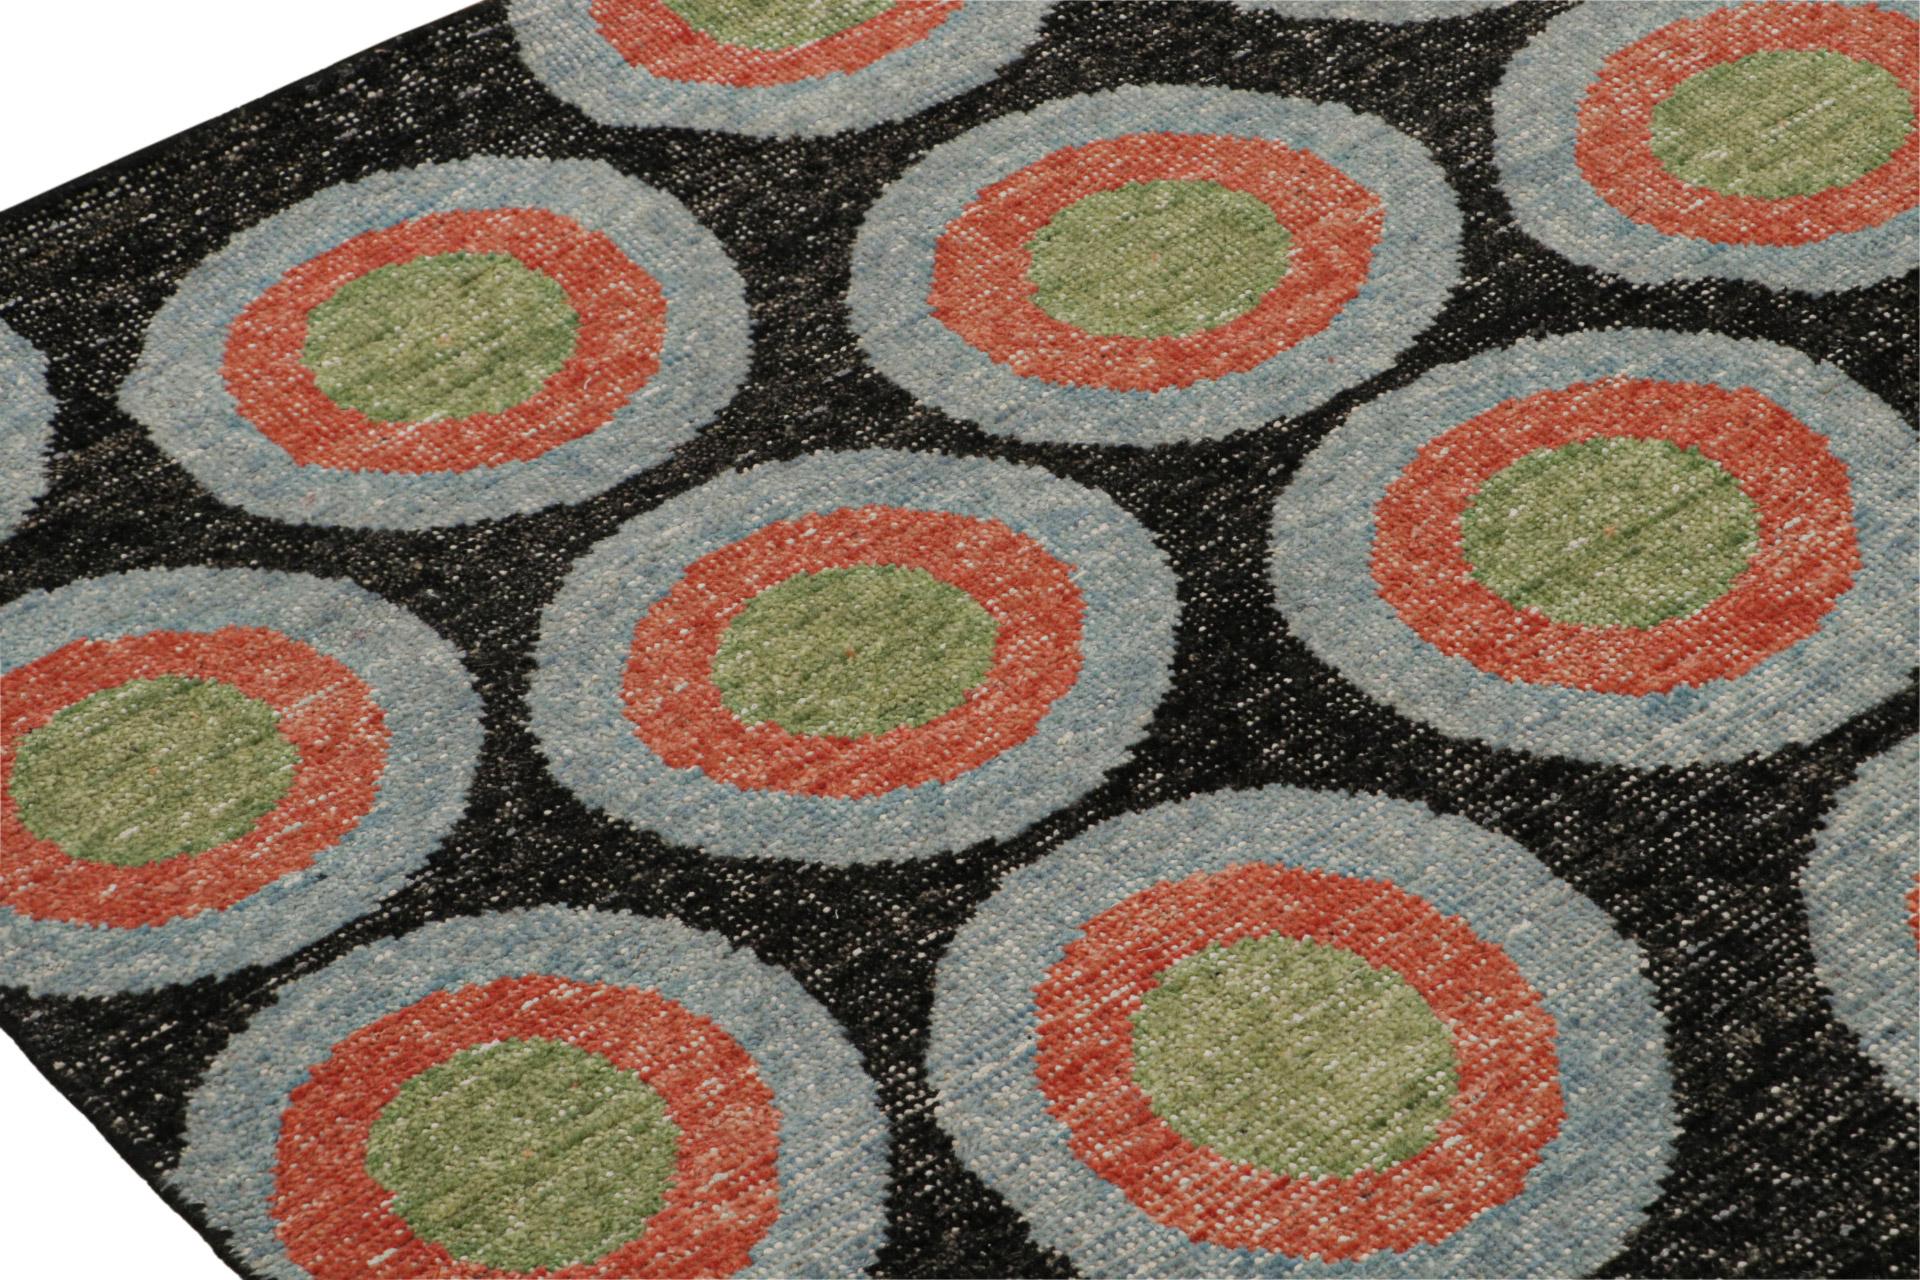 Rug & Kilim’s Modern Deco Rug, with Geometric Patterns in Green, Orange and Blue In New Condition For Sale In Long Island City, NY